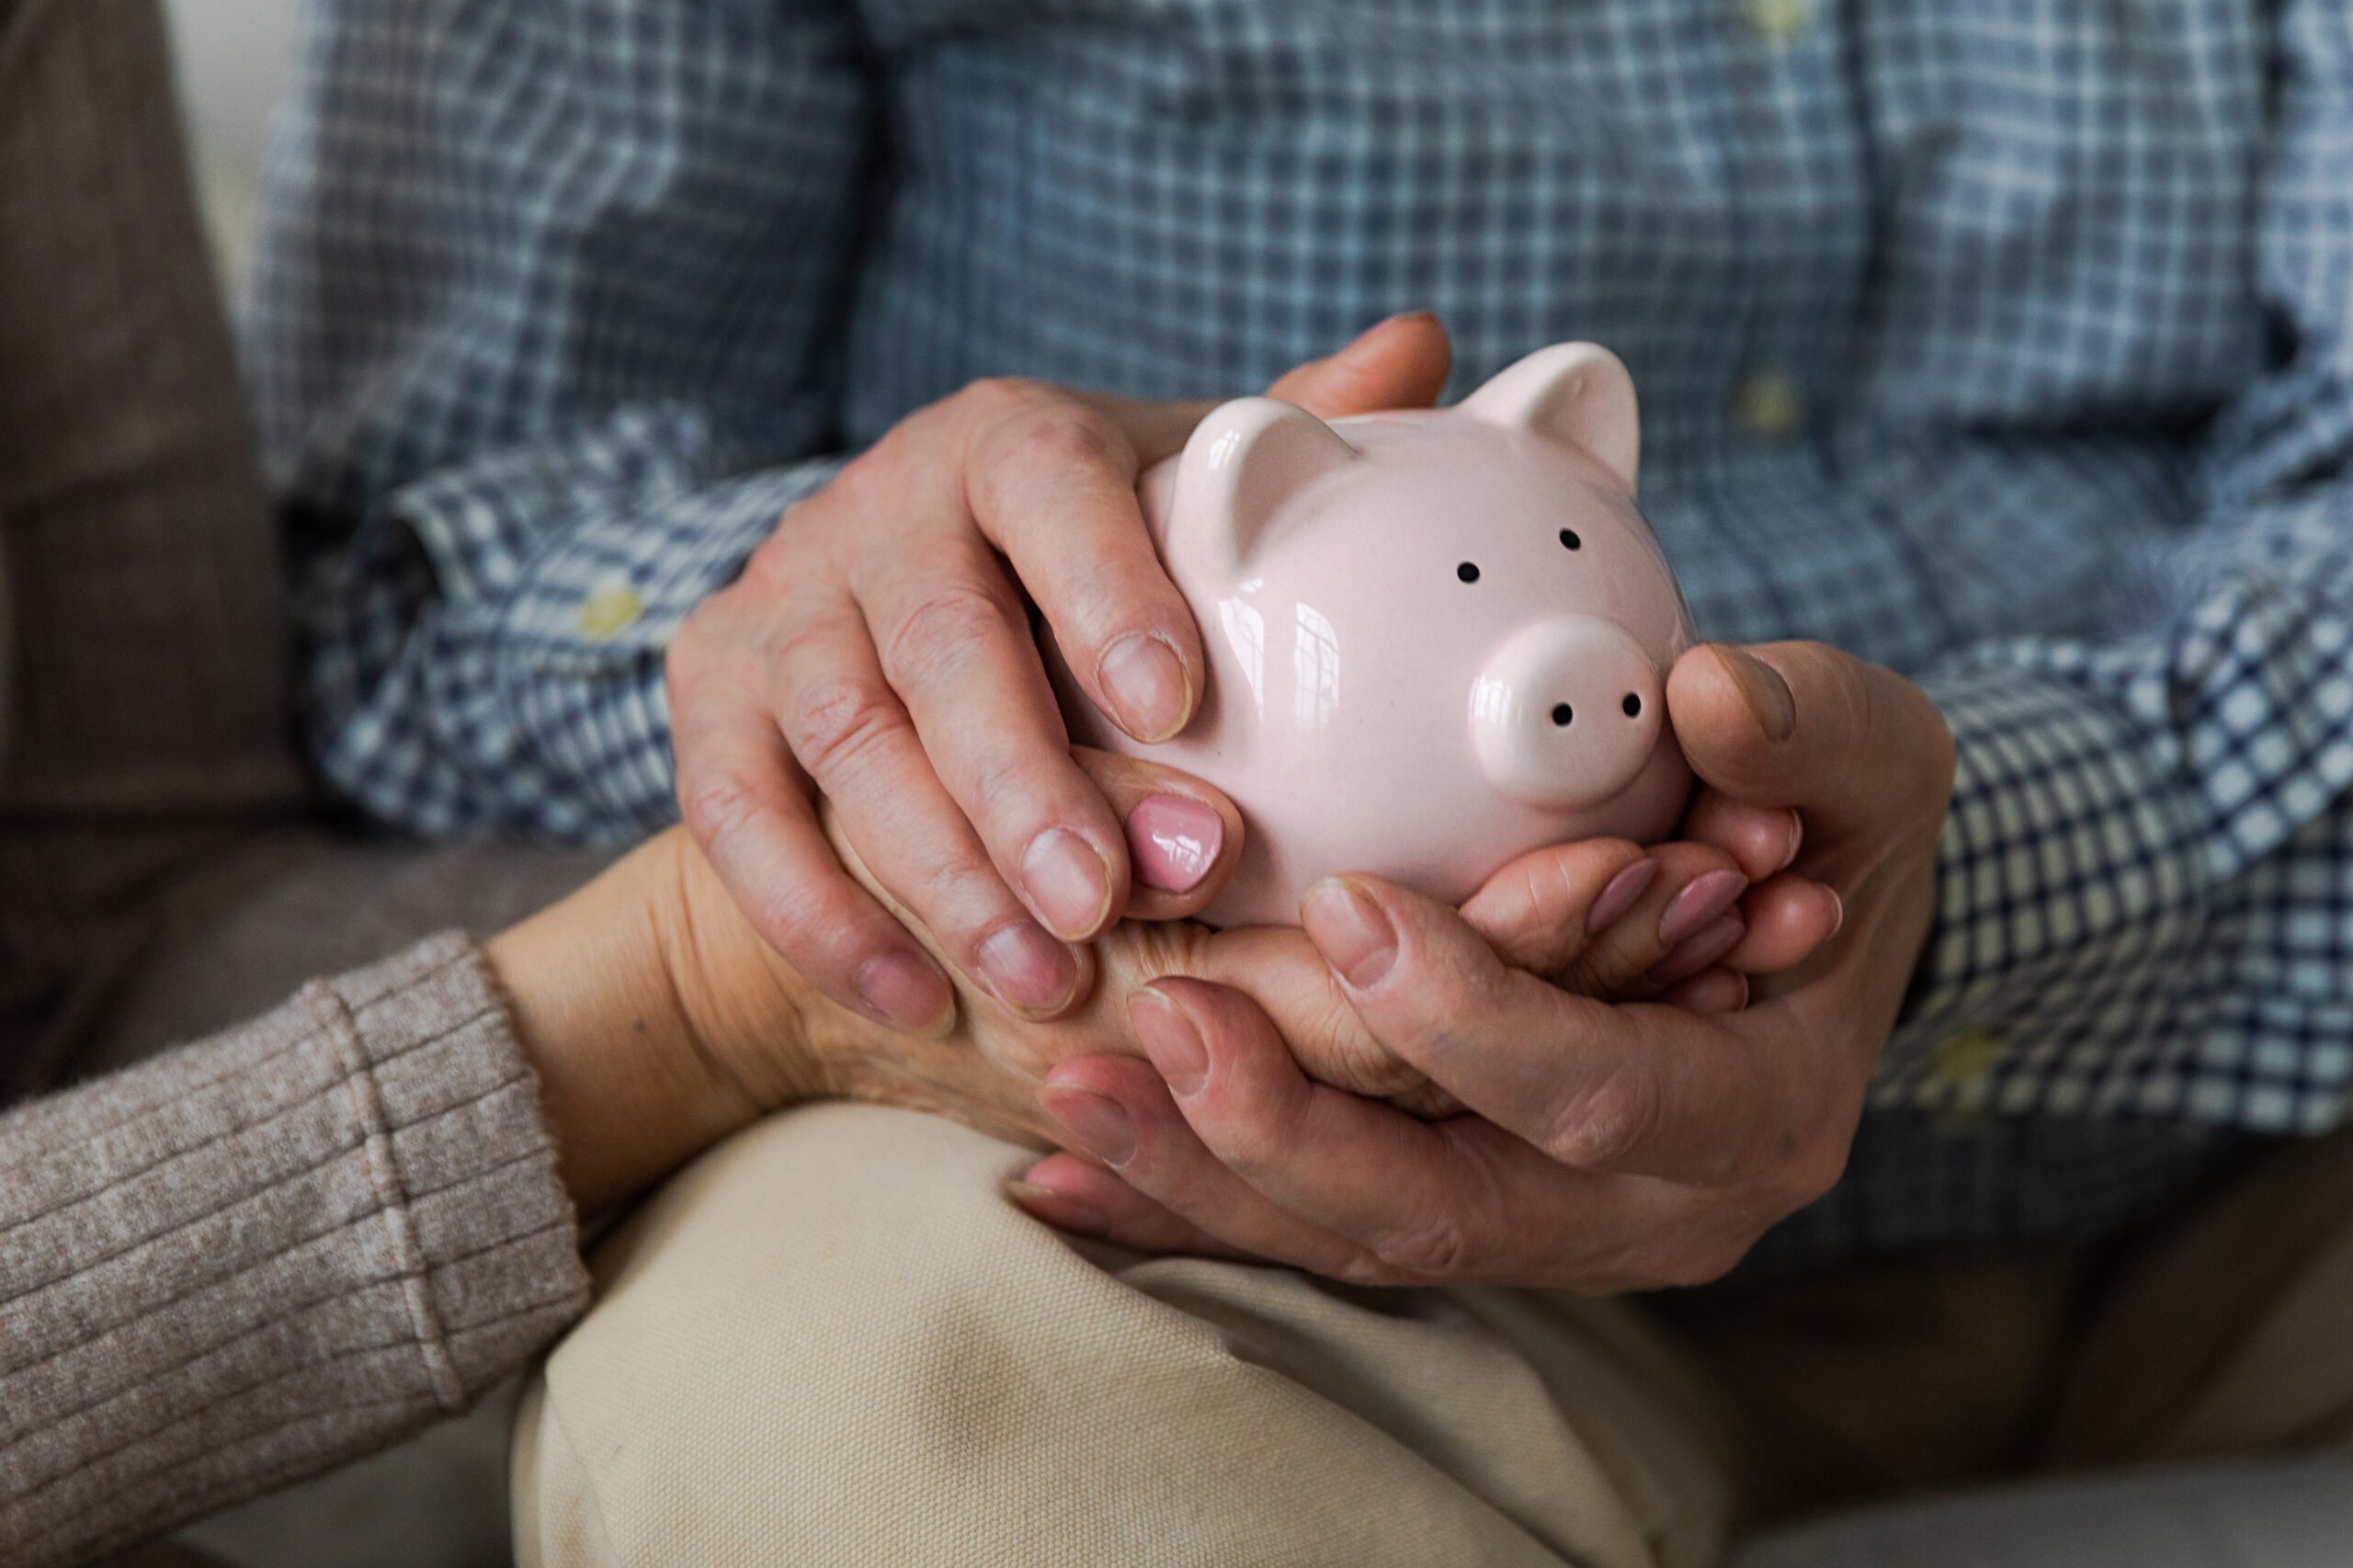 Saving money investment for future. Senior adult mature couple hands holding piggy bank with money coin. Old man woman counting saving money planning retirement budget. Investment banking concept.